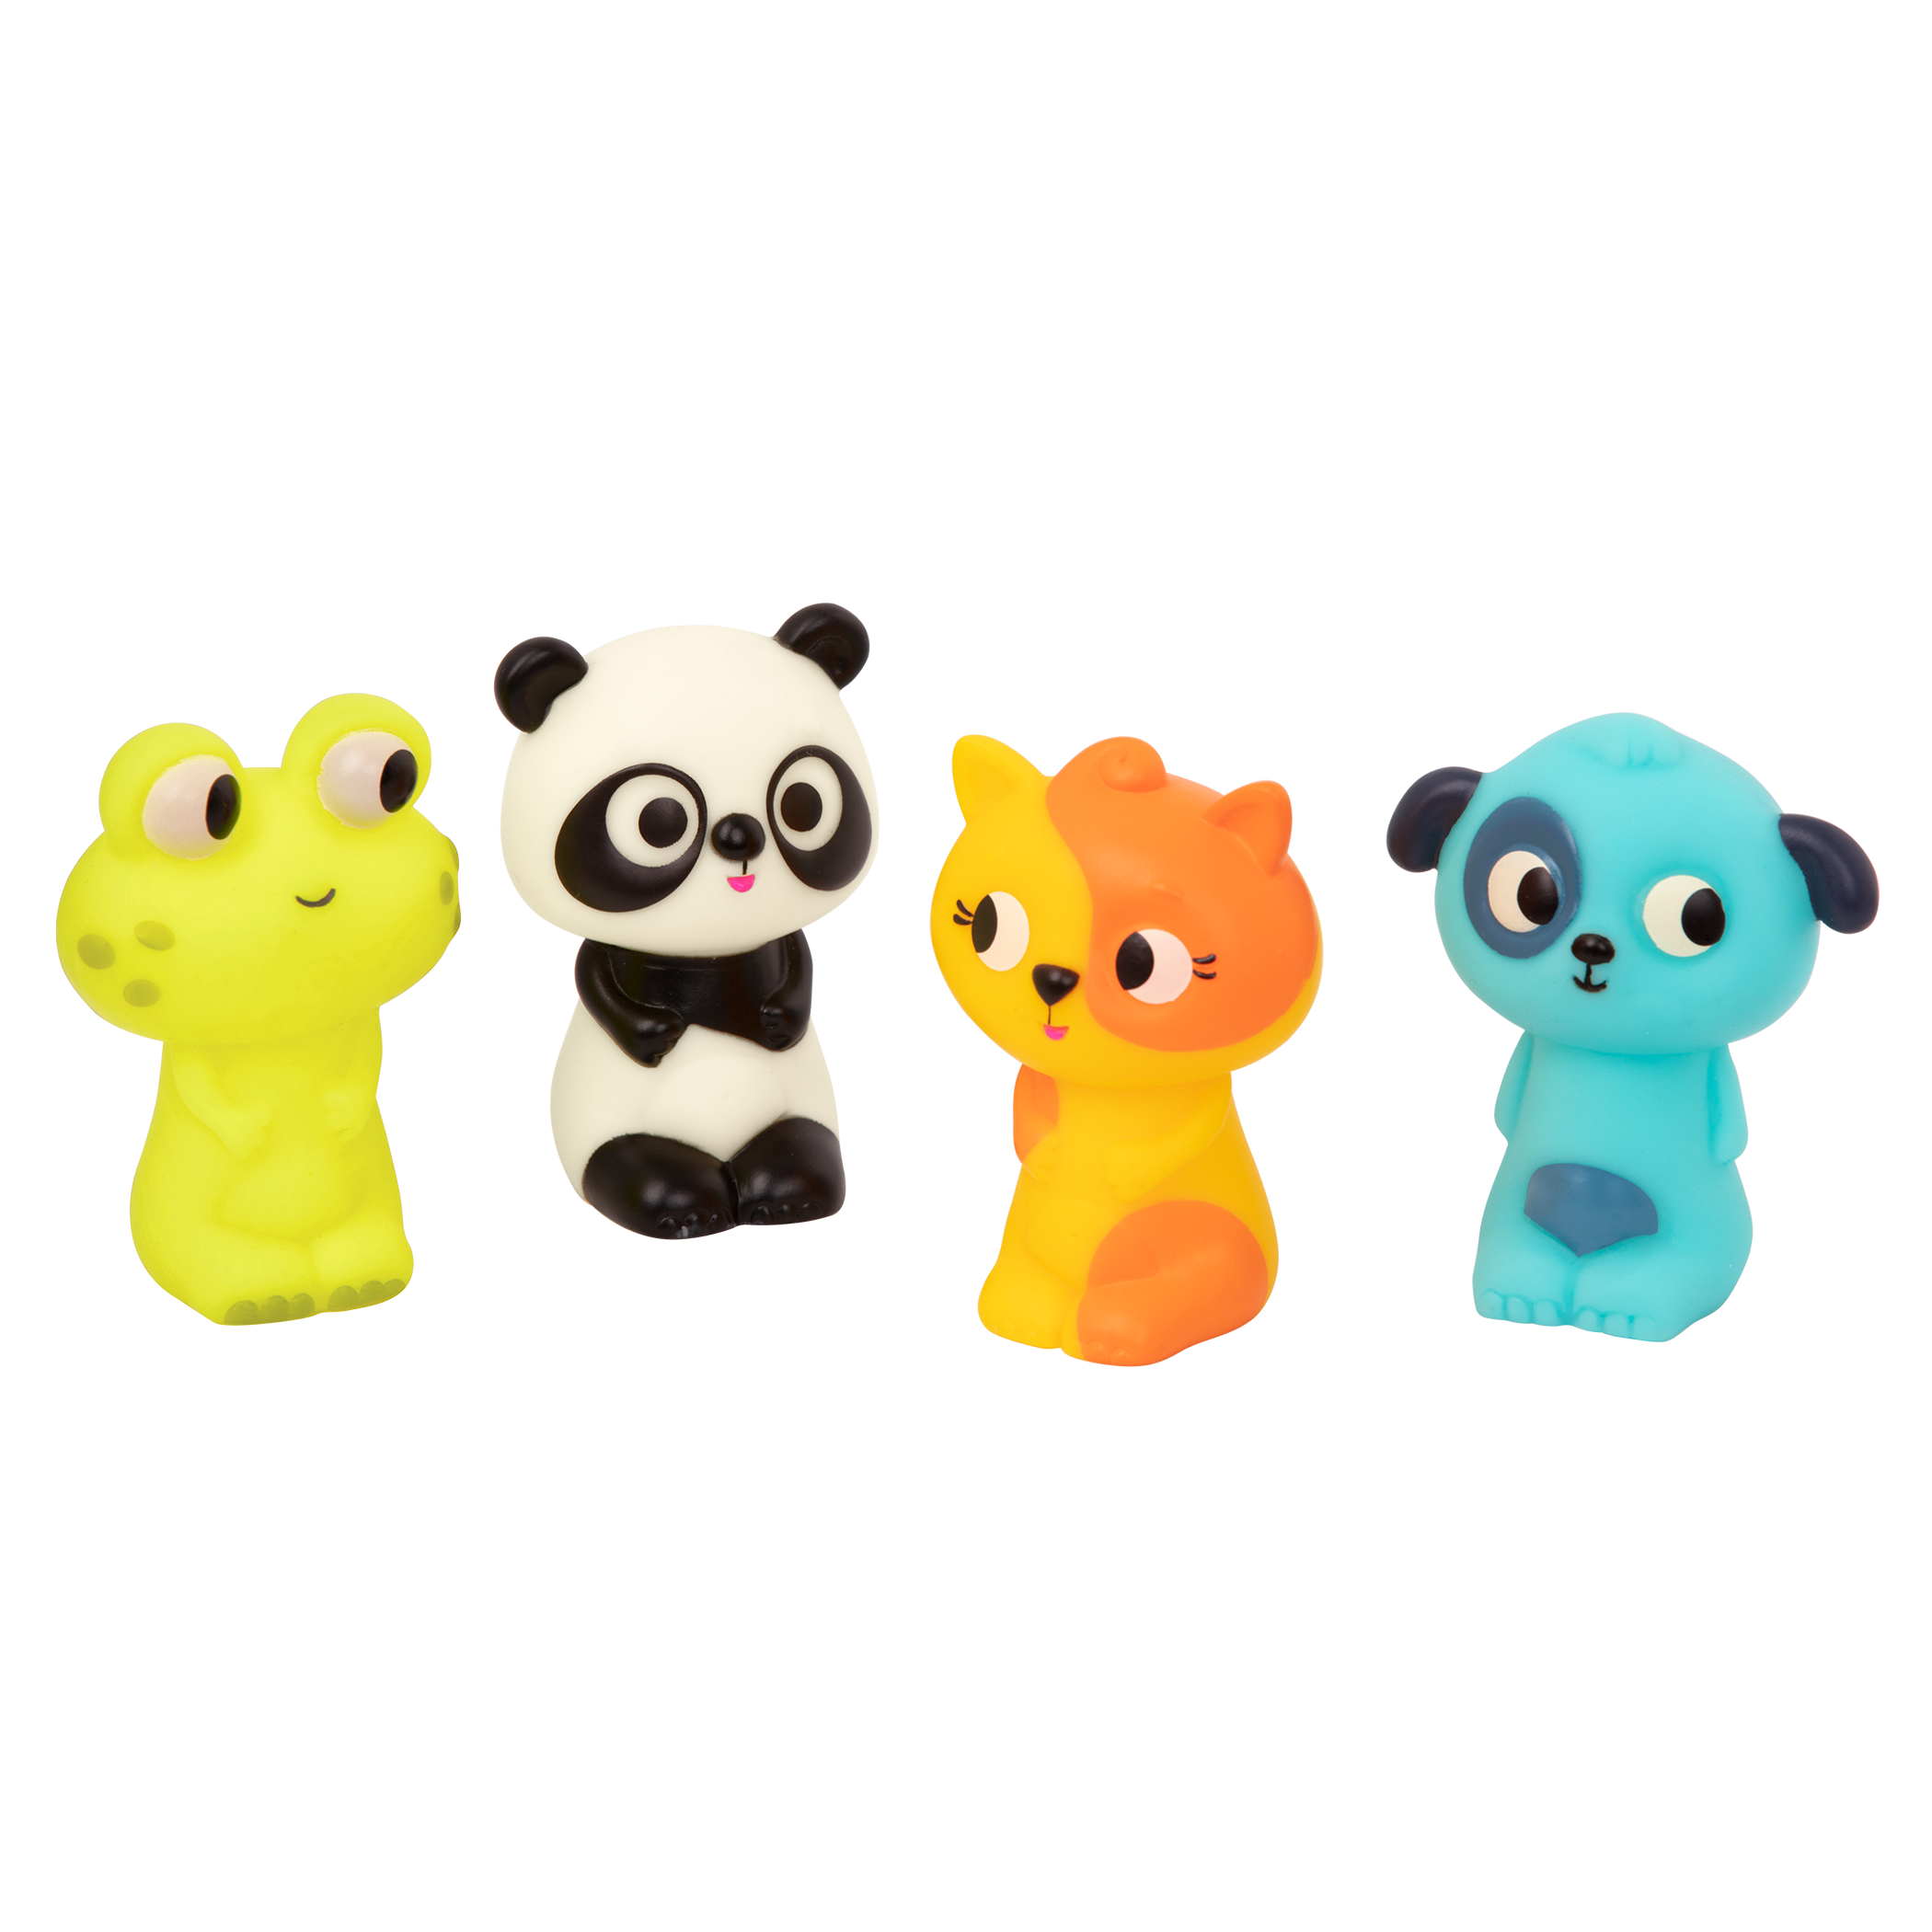 Mini Animal Wooden Pop-up Push Puppet Finger Toy for Kids - China